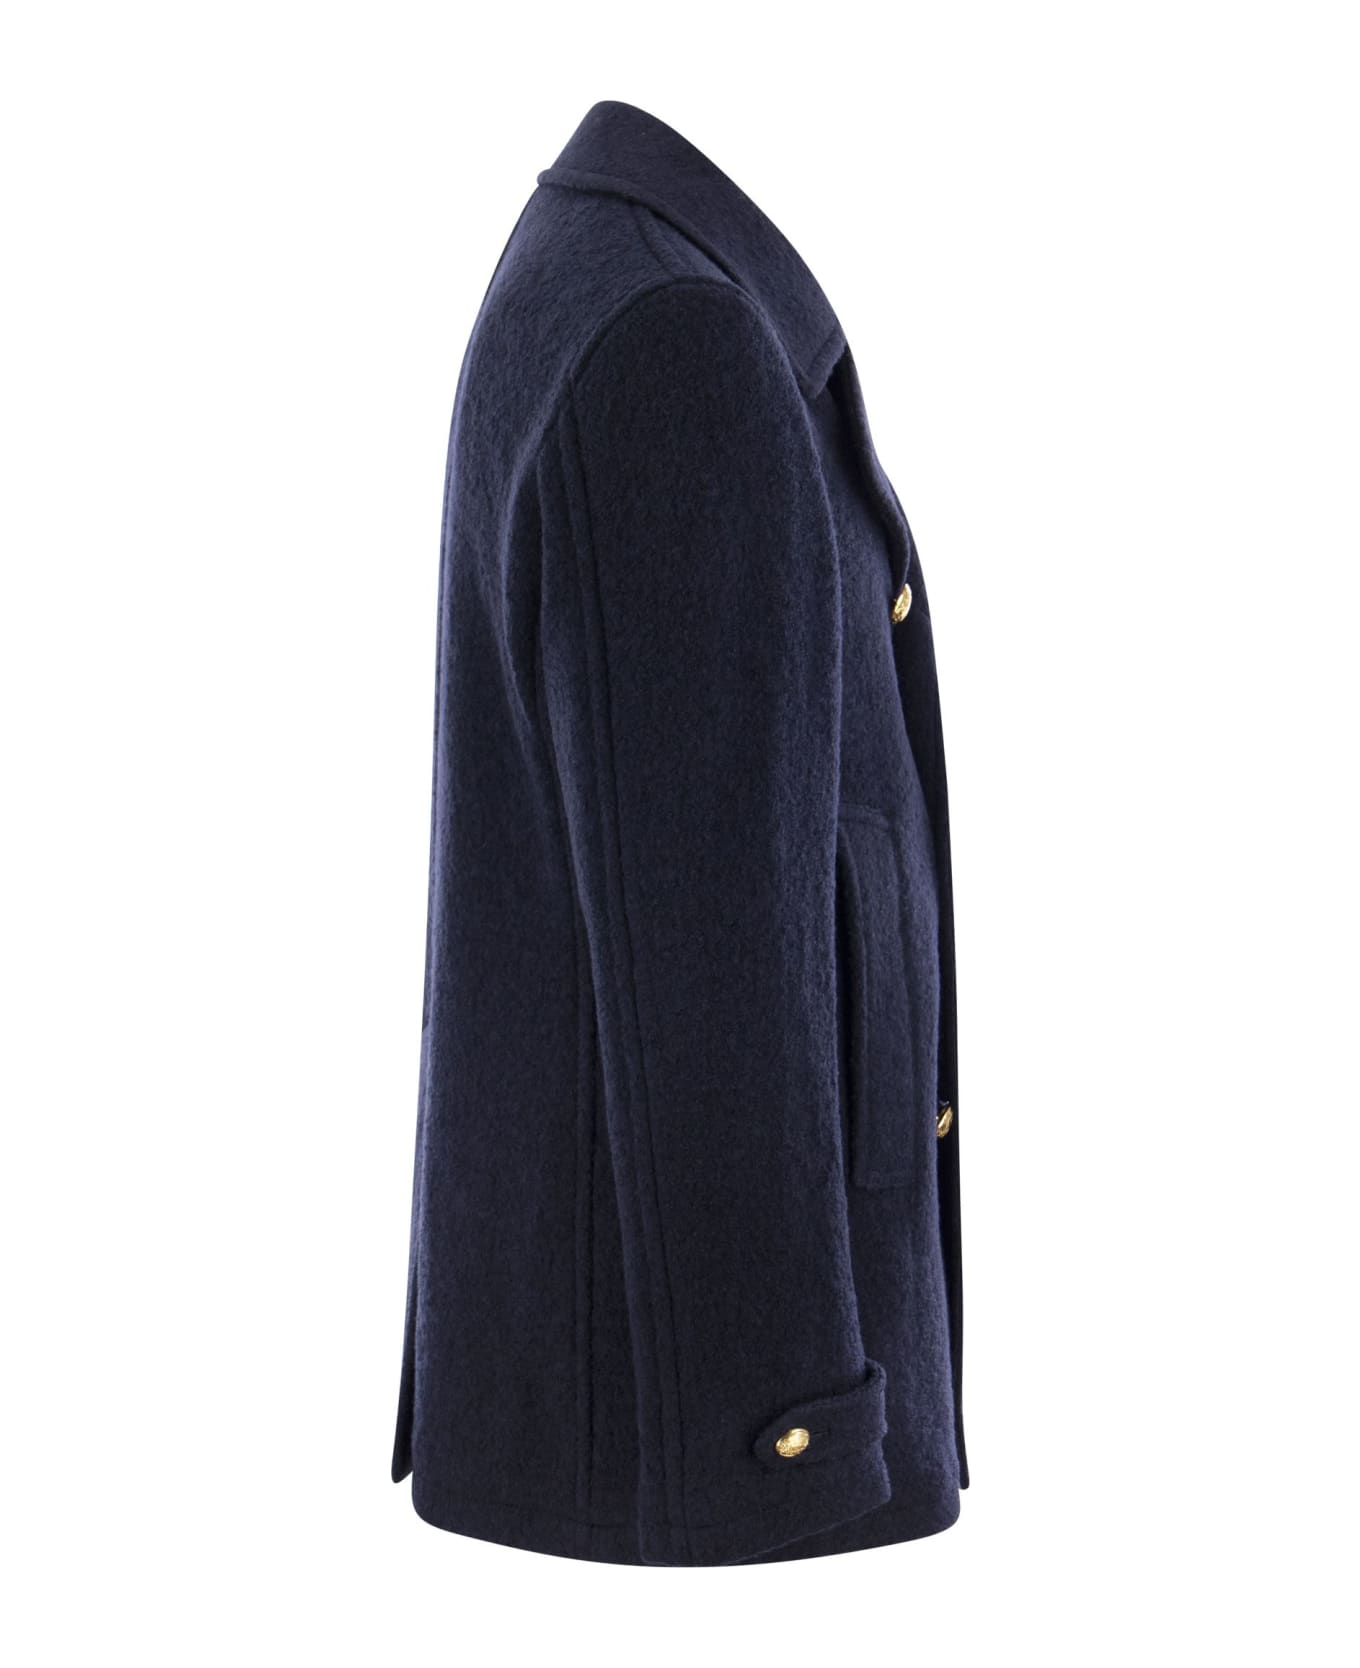 Tagliatore Double-breasted Coat - Navy Blue コート